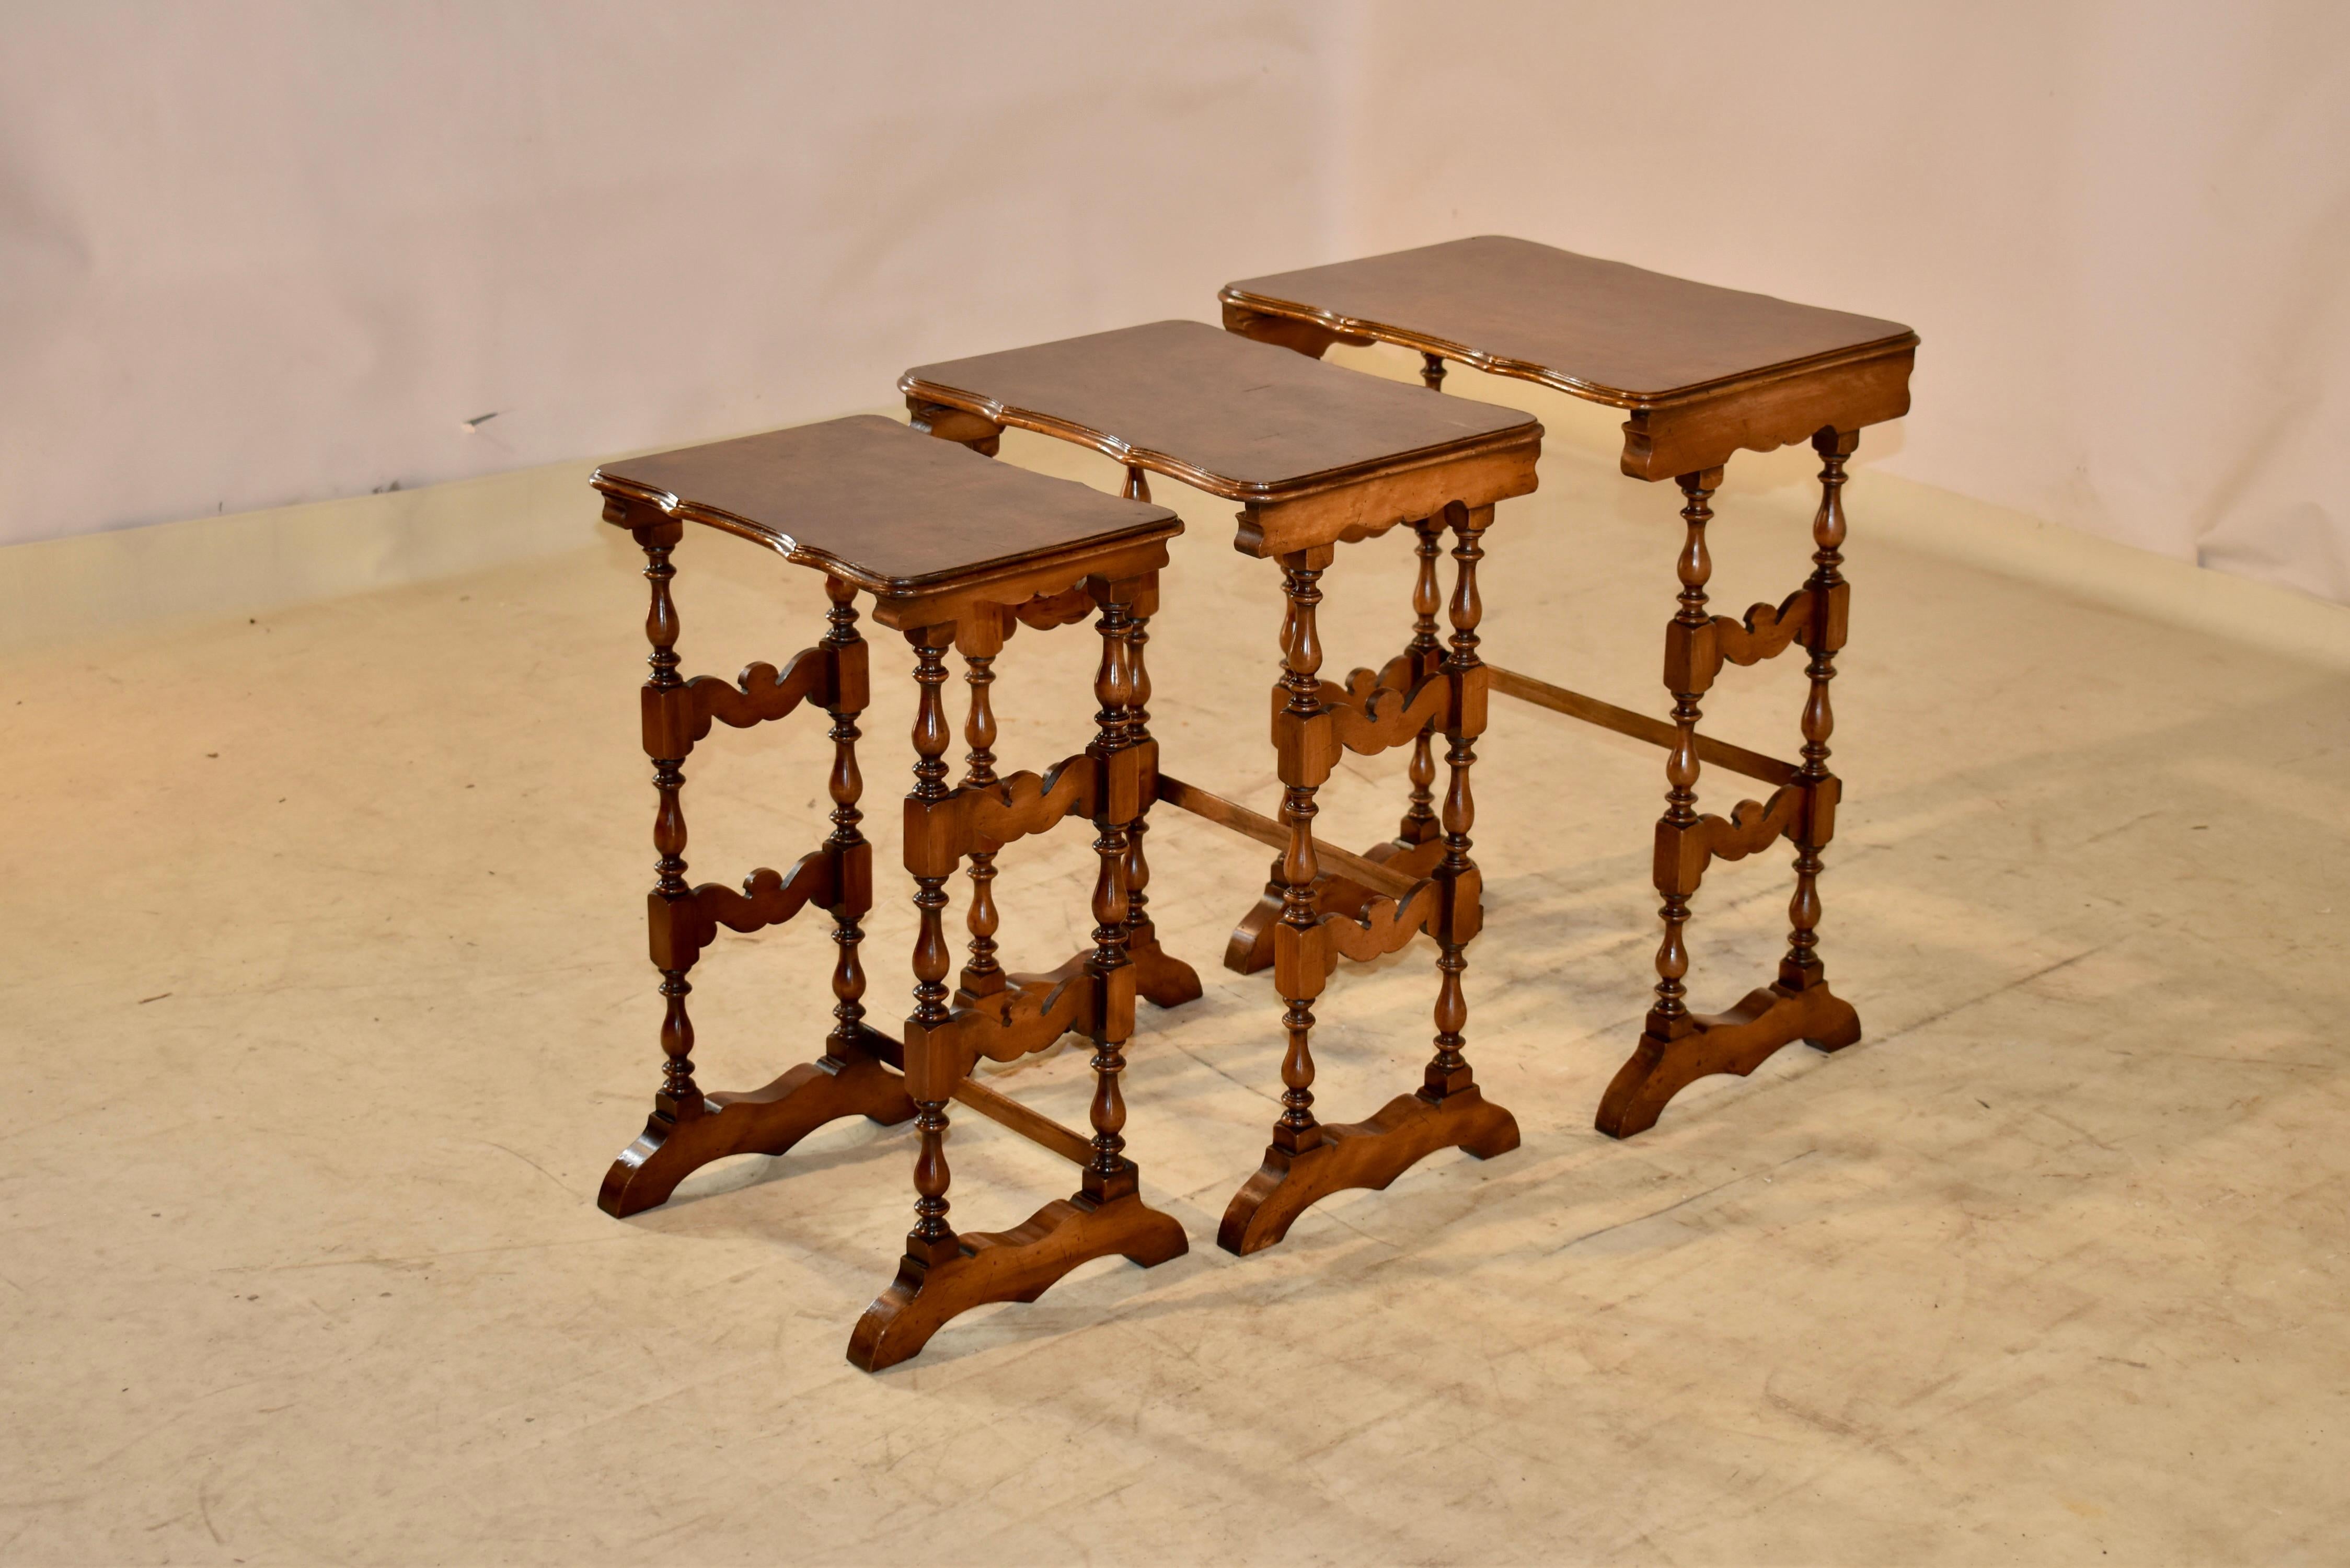 19th century set of three nesting side tables from England. The tables have burl walnut tops with scalloped and beveled edges on the front and back for added design detail. The tables are supported on trestle type legs with lovely hand scalloped